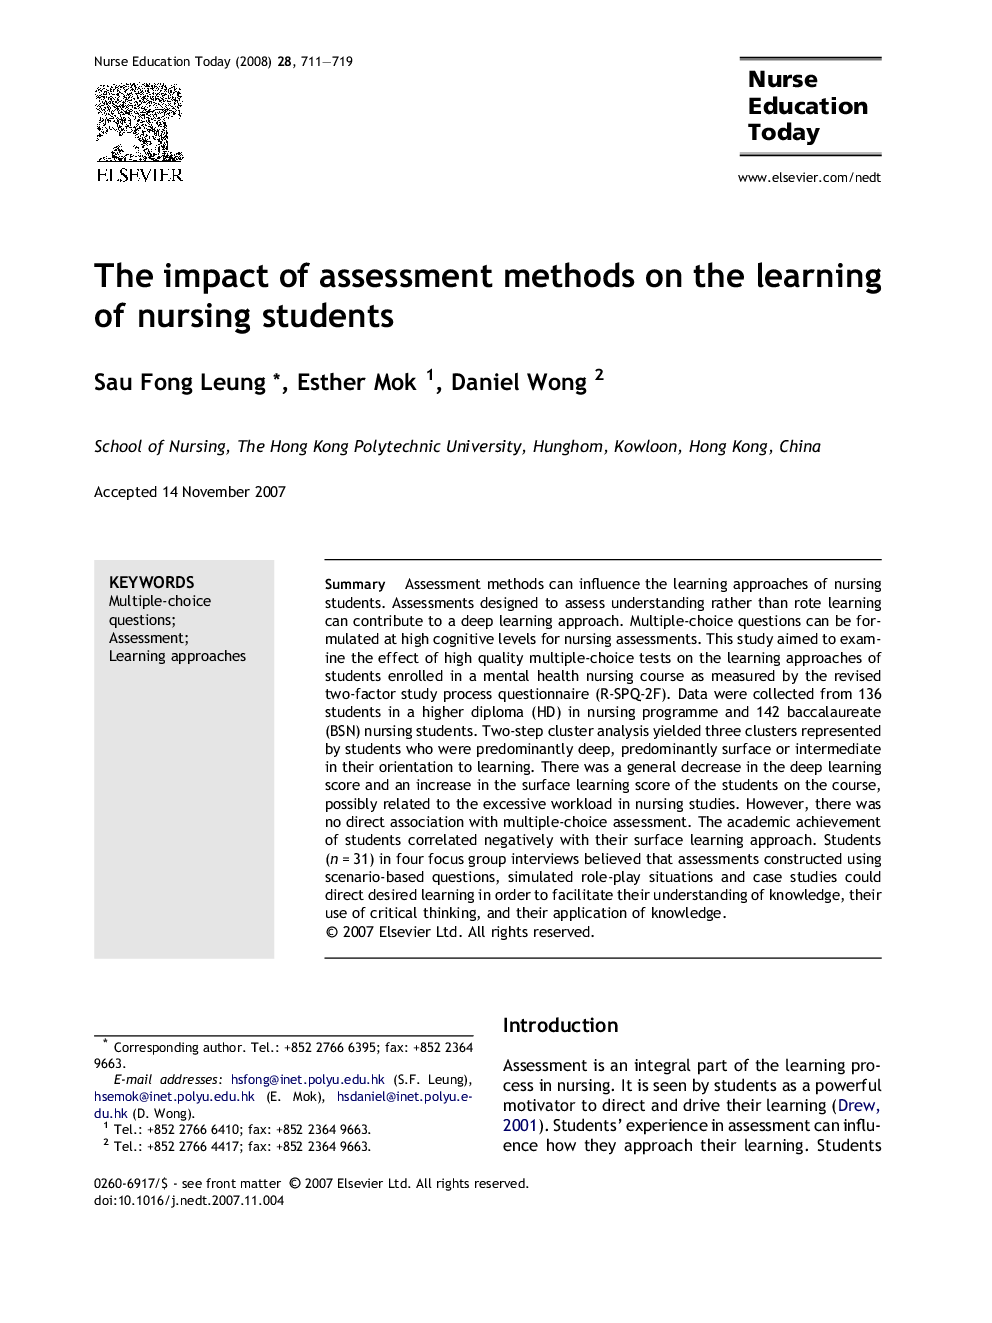 The impact of assessment methods on the learning of nursing students